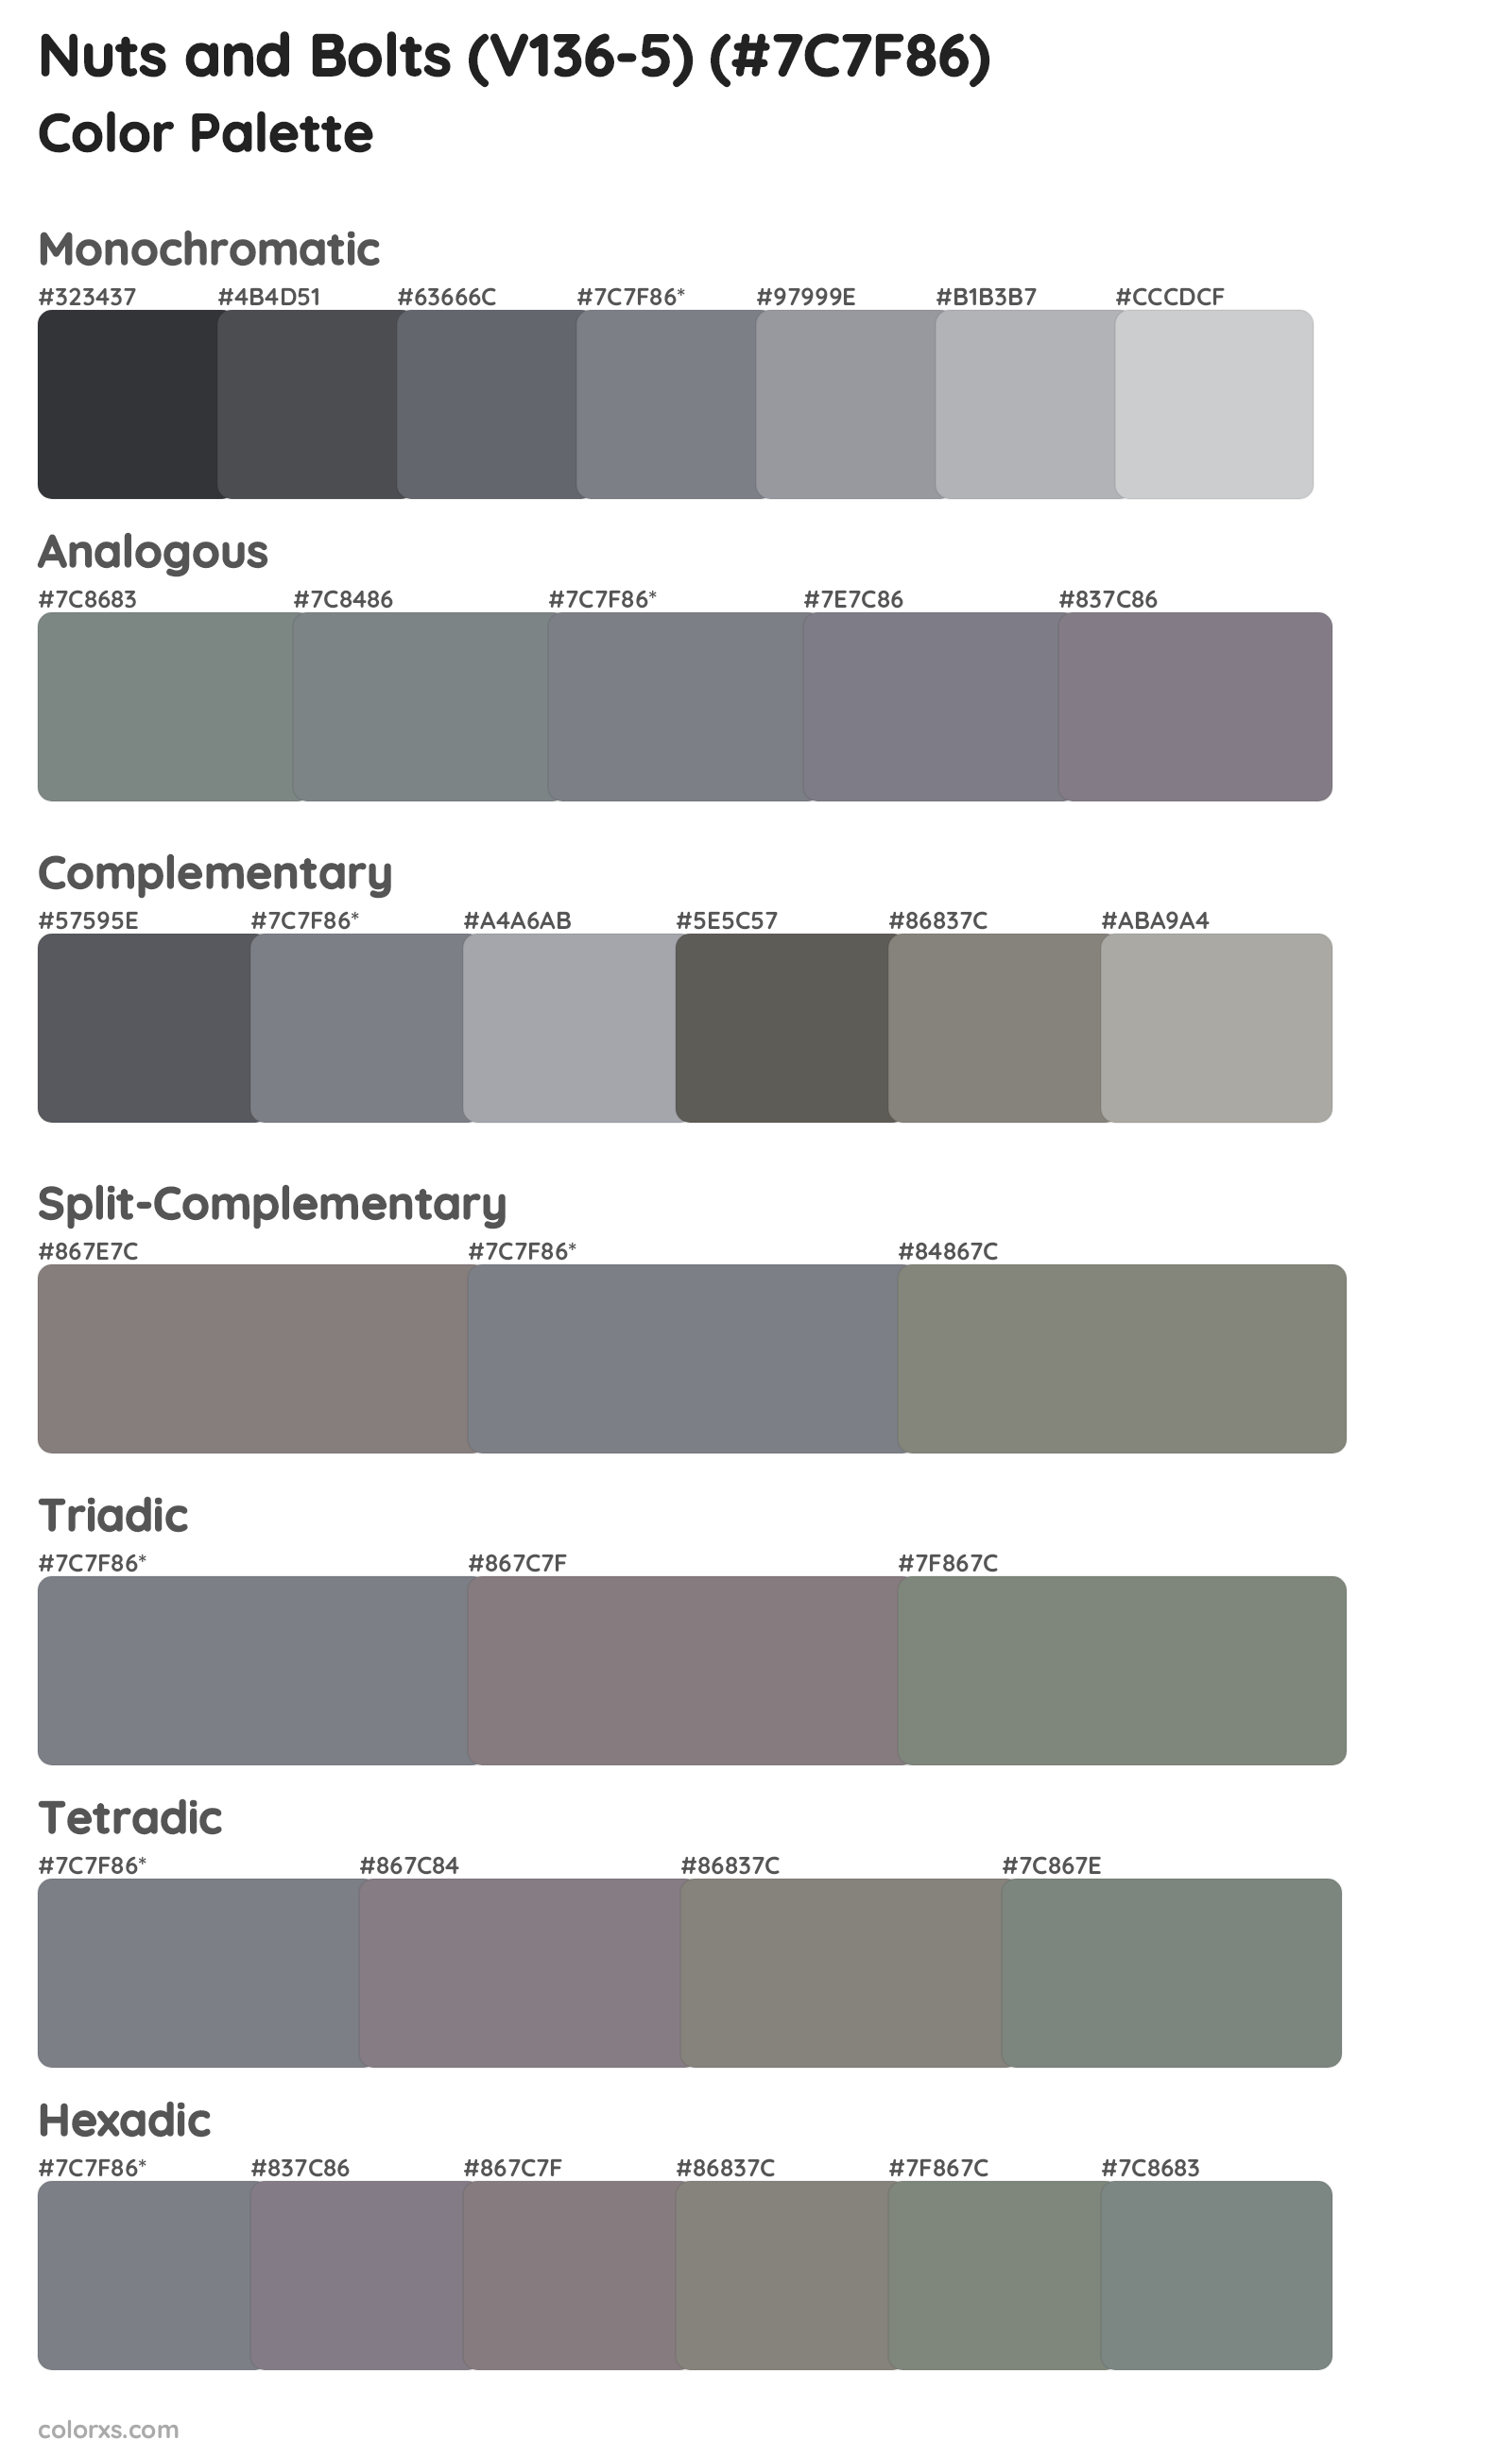 Nuts and Bolts (V136-5) Color Scheme Palettes